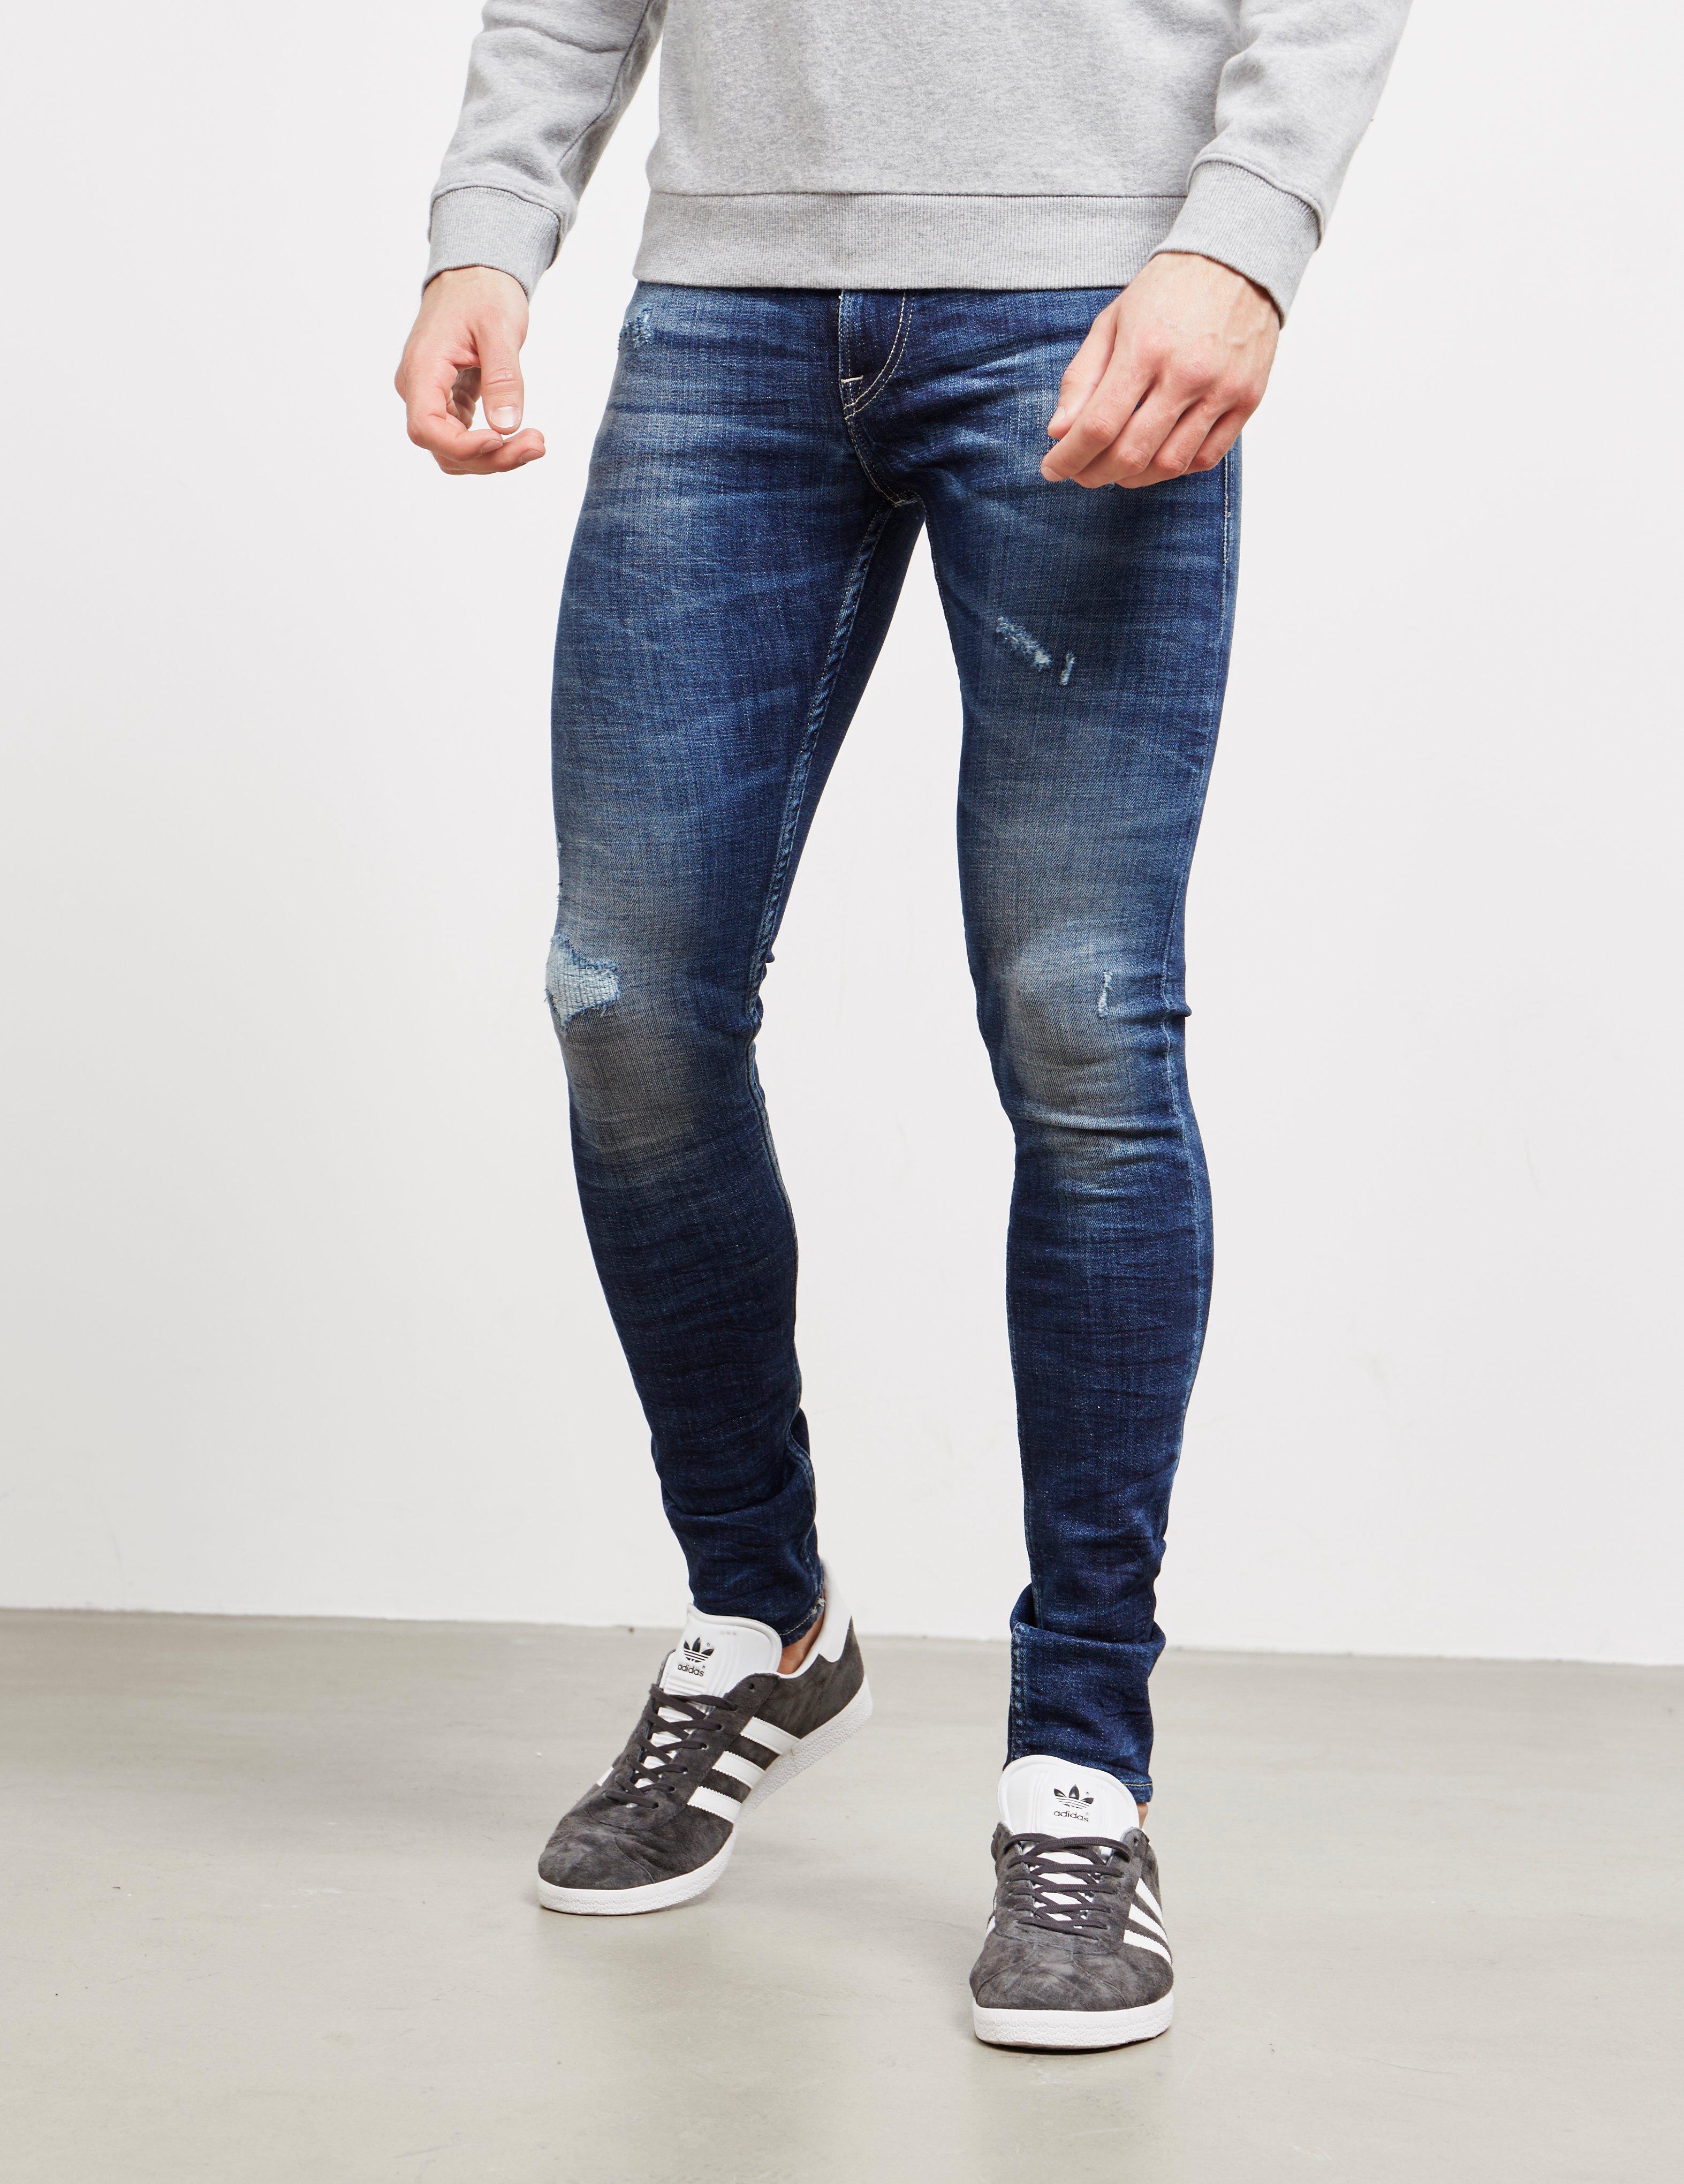 Lyst - Replay Mens Jondrill Skinny Ripped Jeans Mid Wash/mid Wash in ...